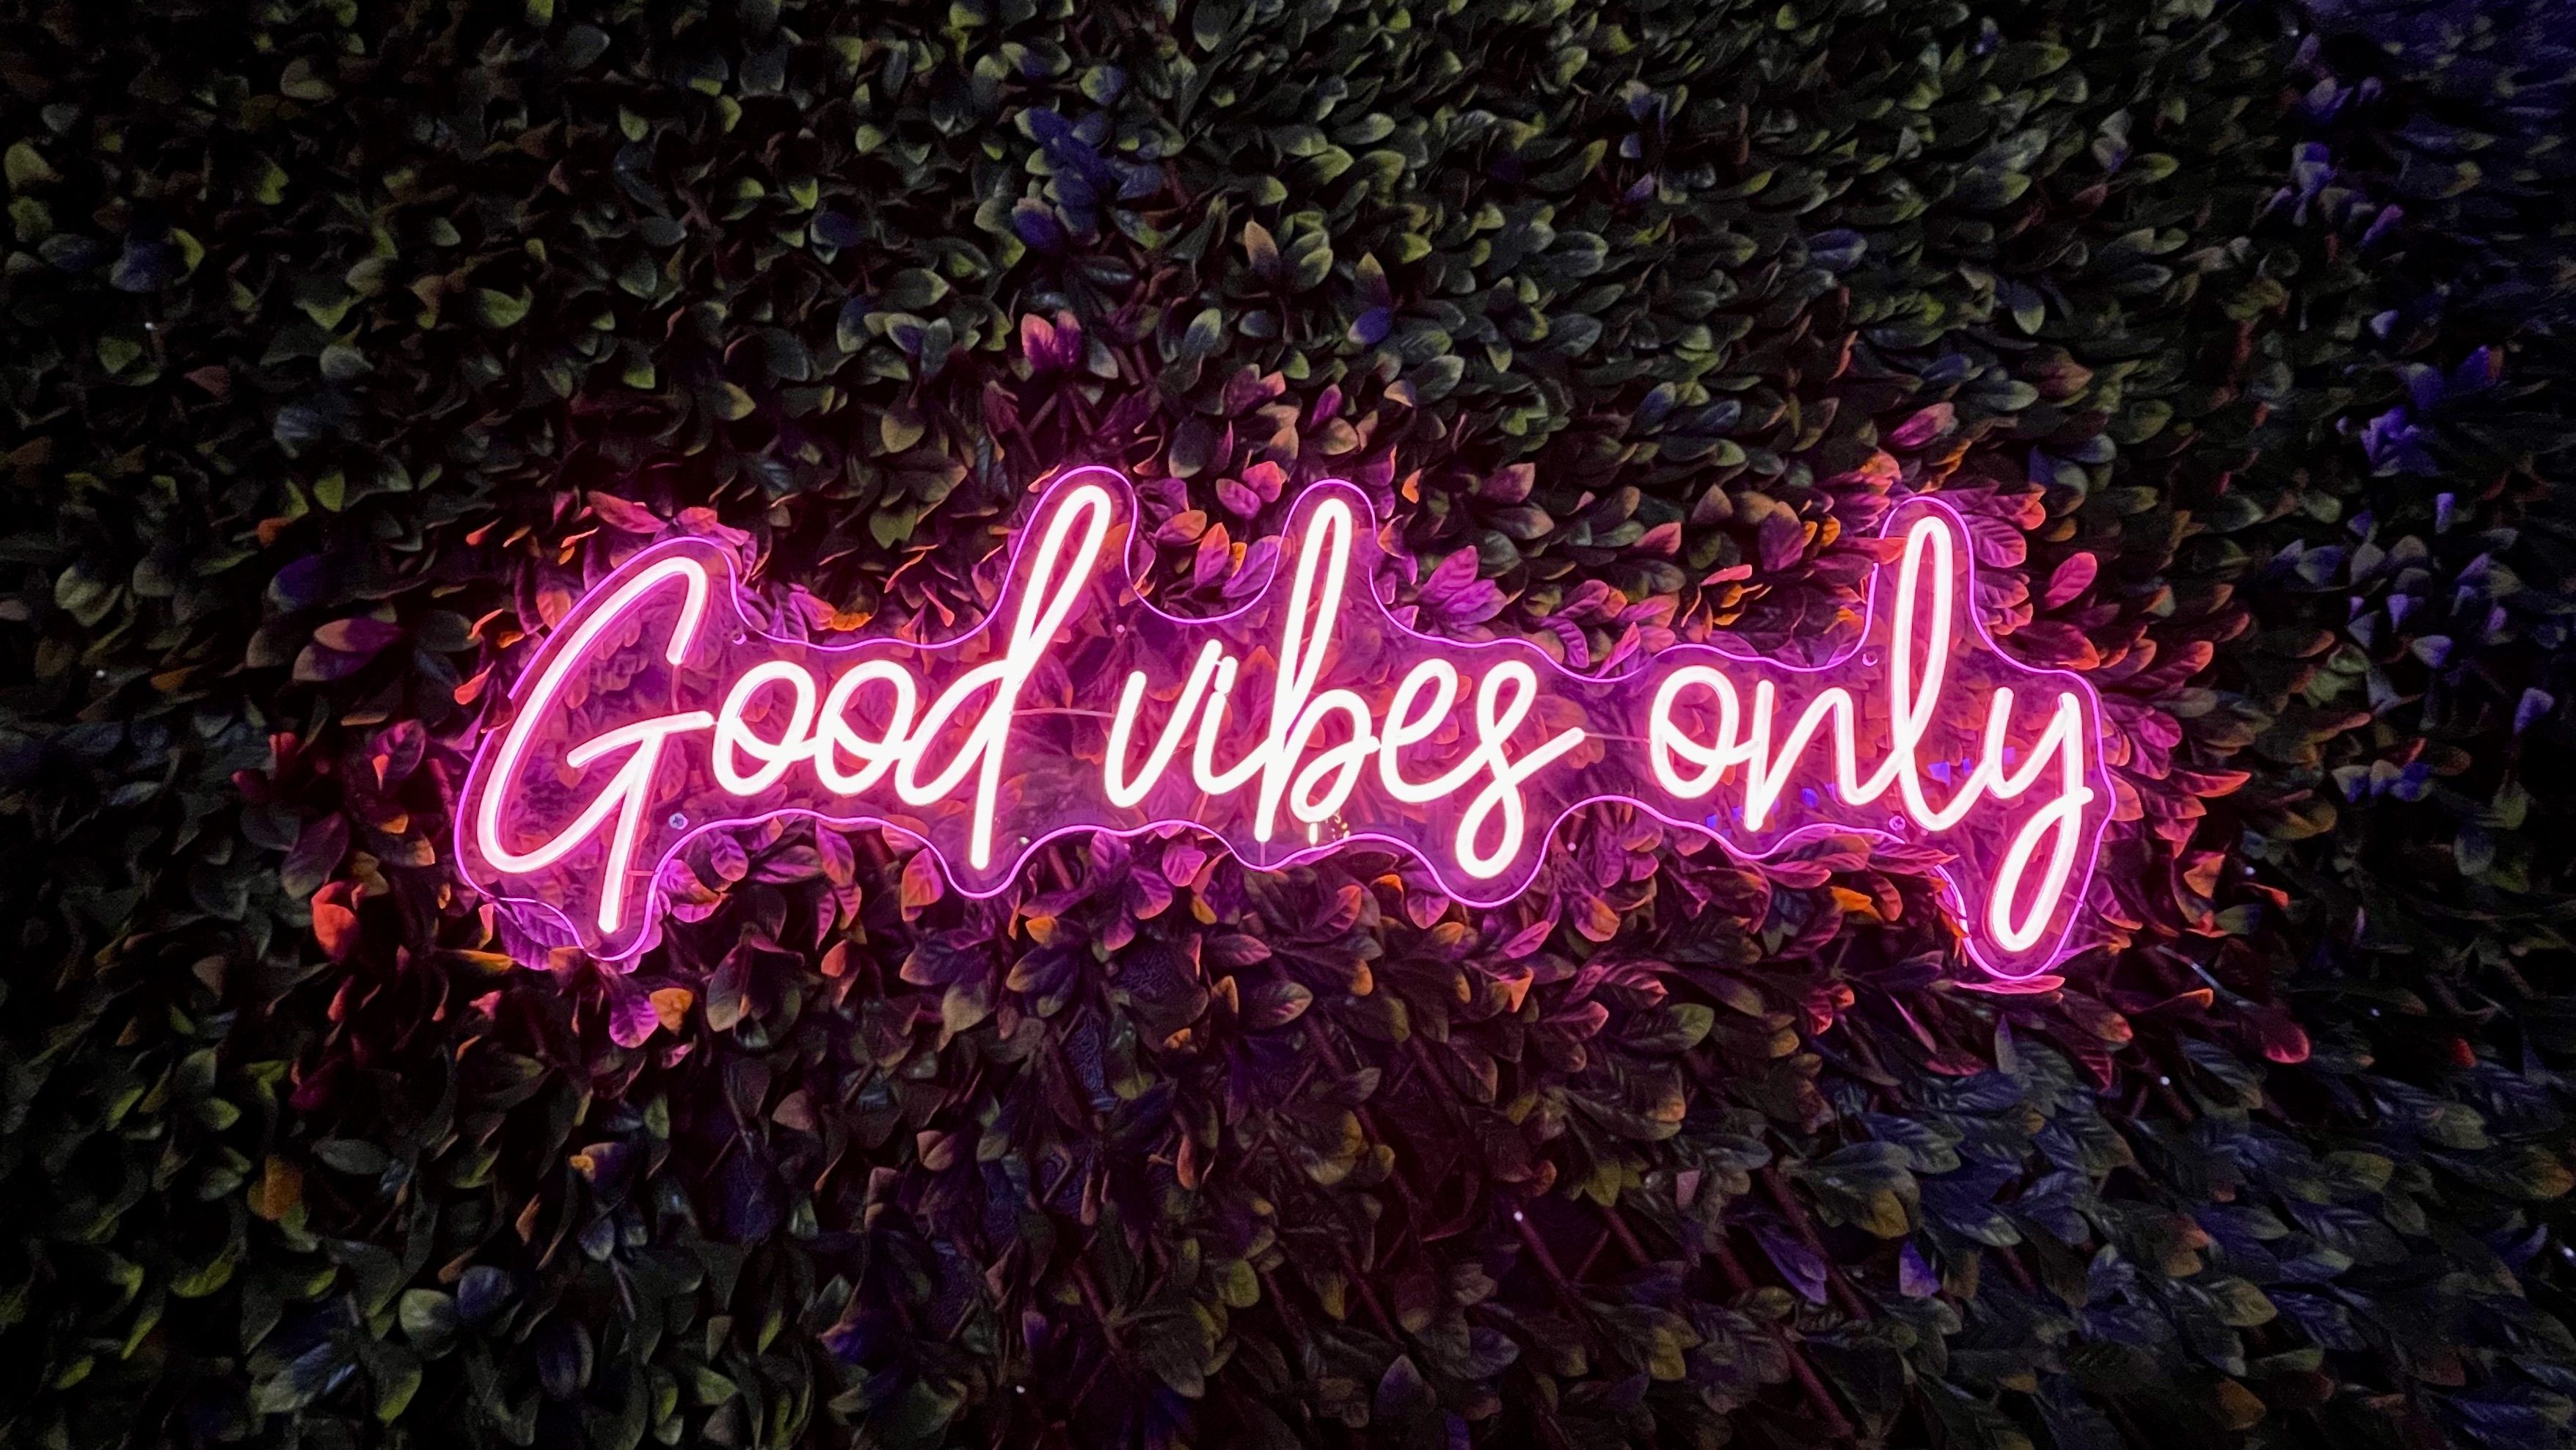 A neon sign that says good vibes only - Neon pink